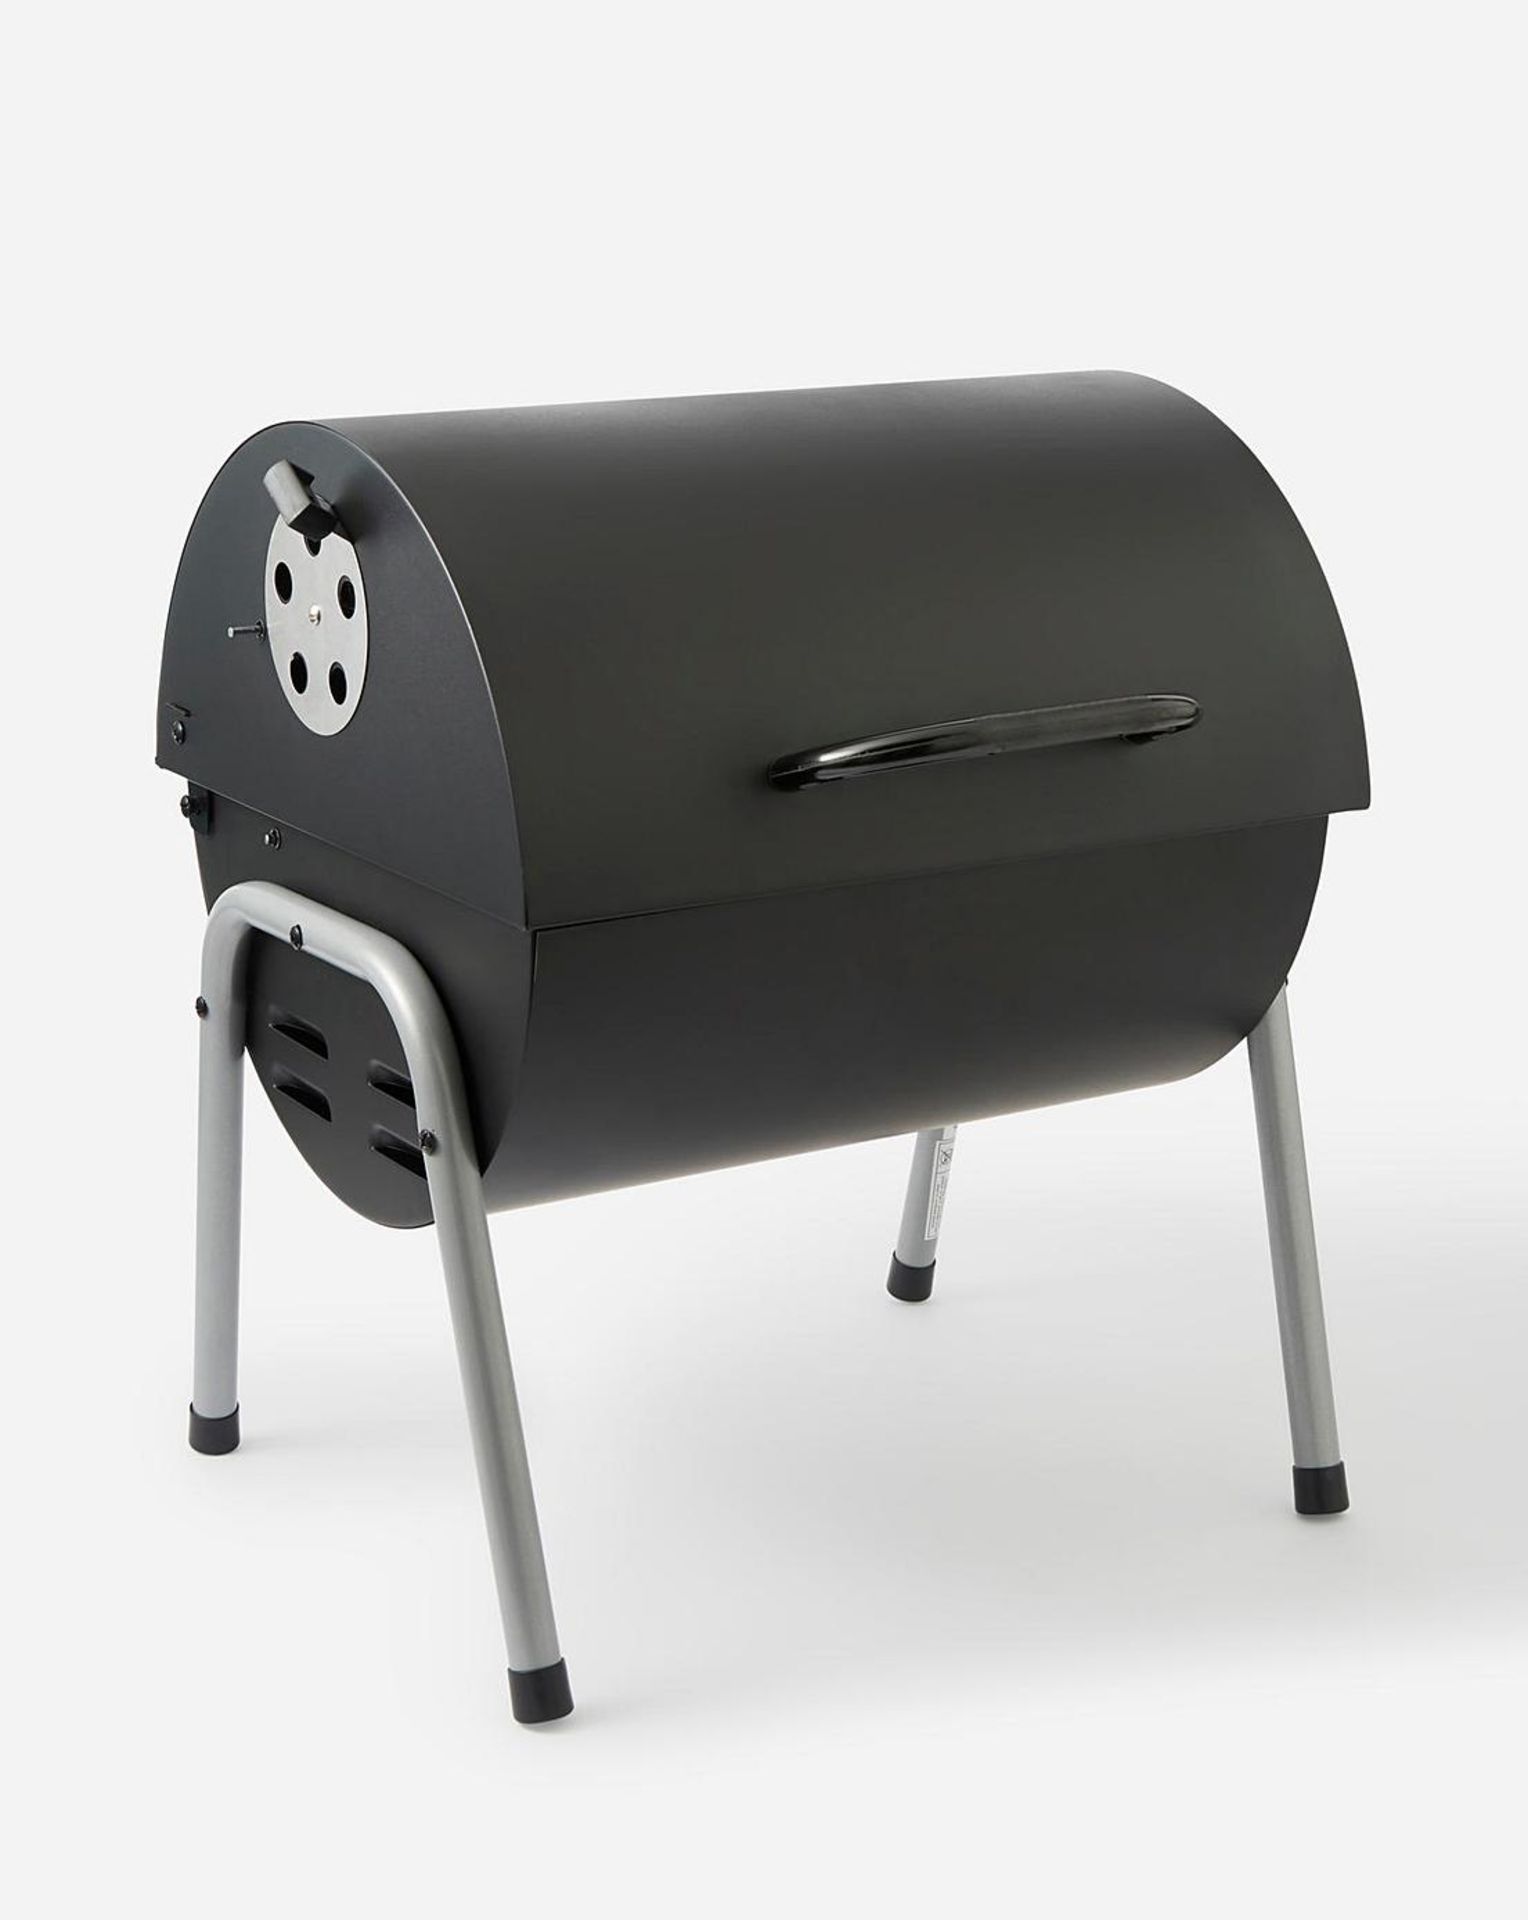 TRADE LOT 12x BRAND NEW Tabletop Oil Drum Barbeque Grill. RRP £59.99 EACH. Black steel firebowl with - Image 3 of 4